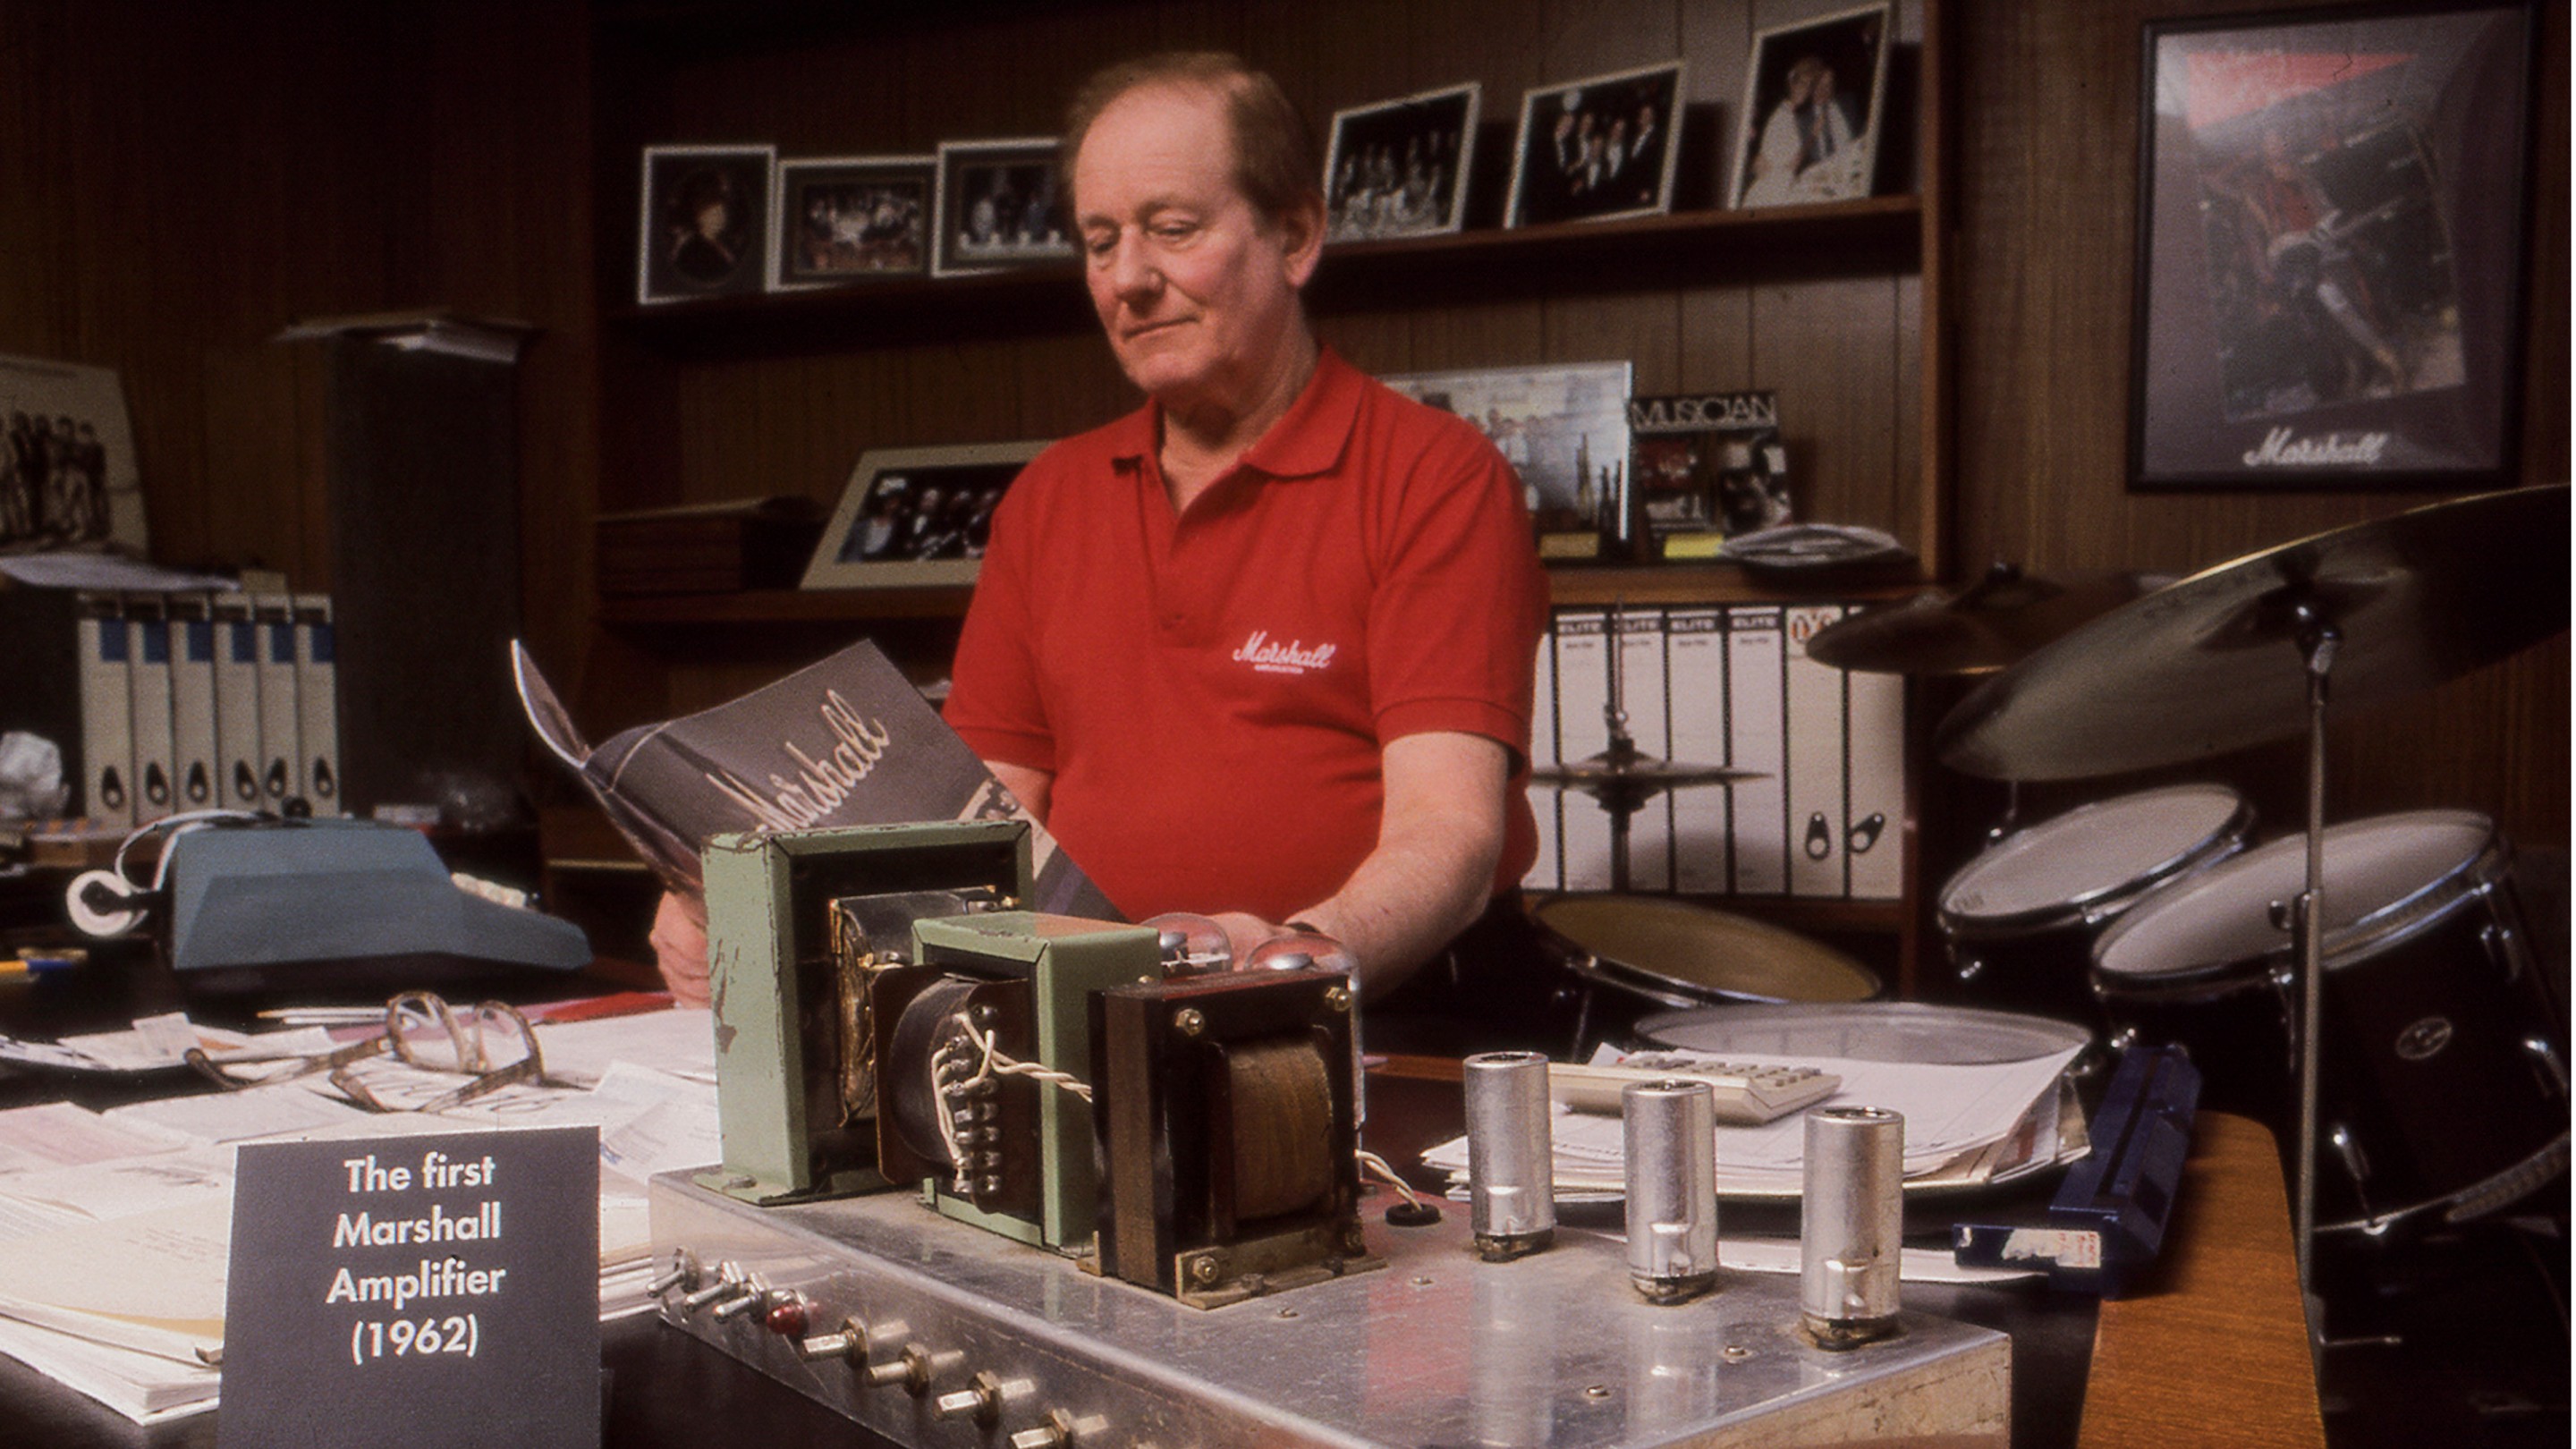 Jim Marshall in front of the number one Marshall amplifier